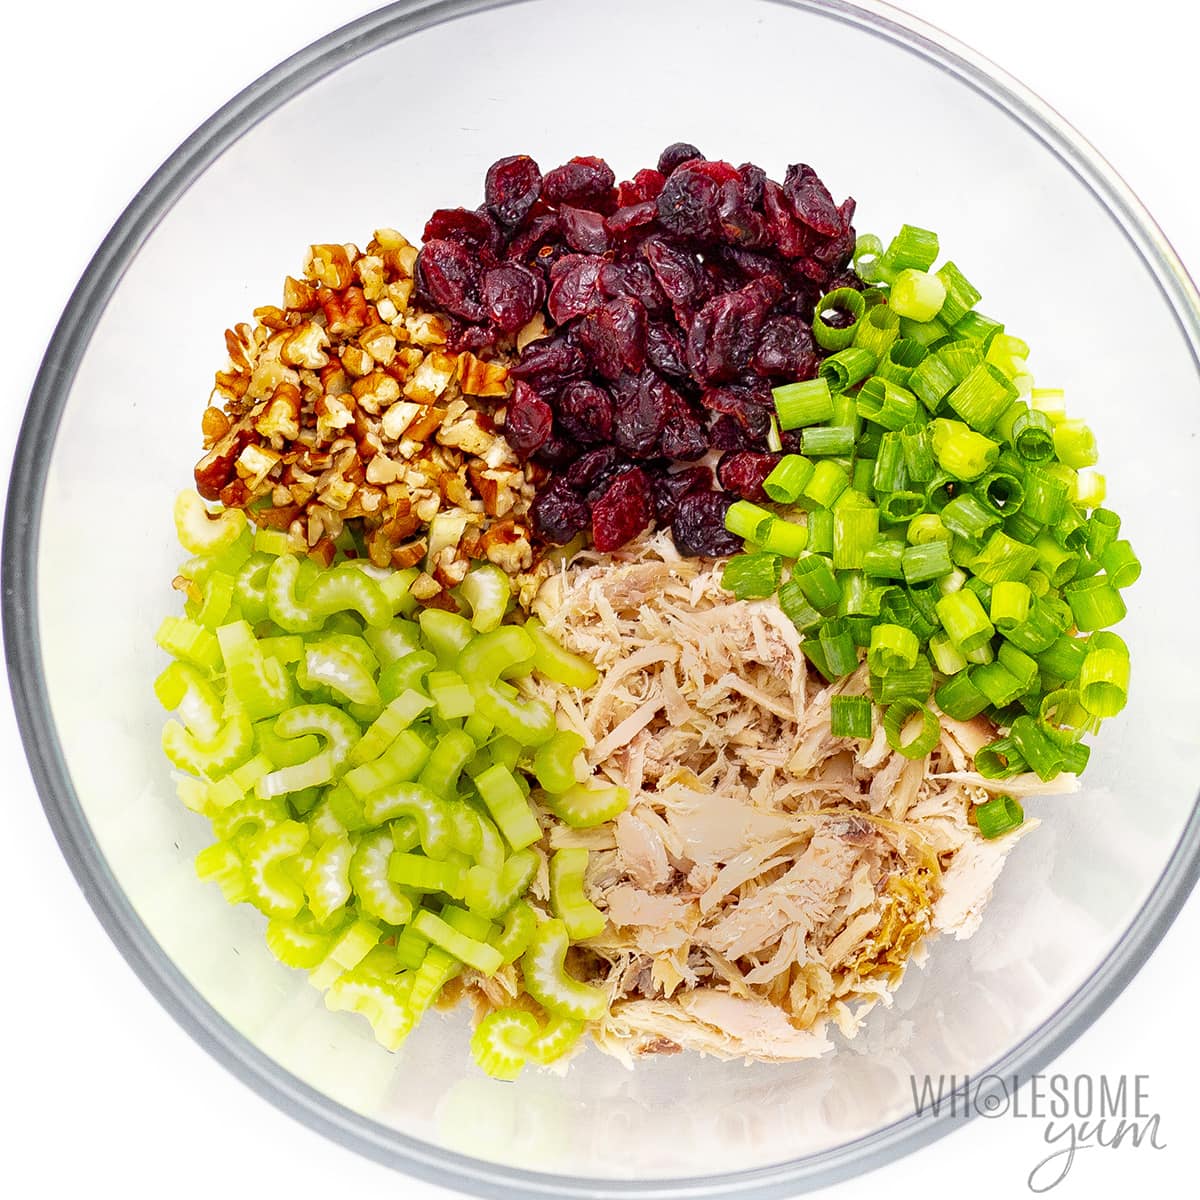 Turkey, celery, cranberries, peans, and green onions in a bowl.